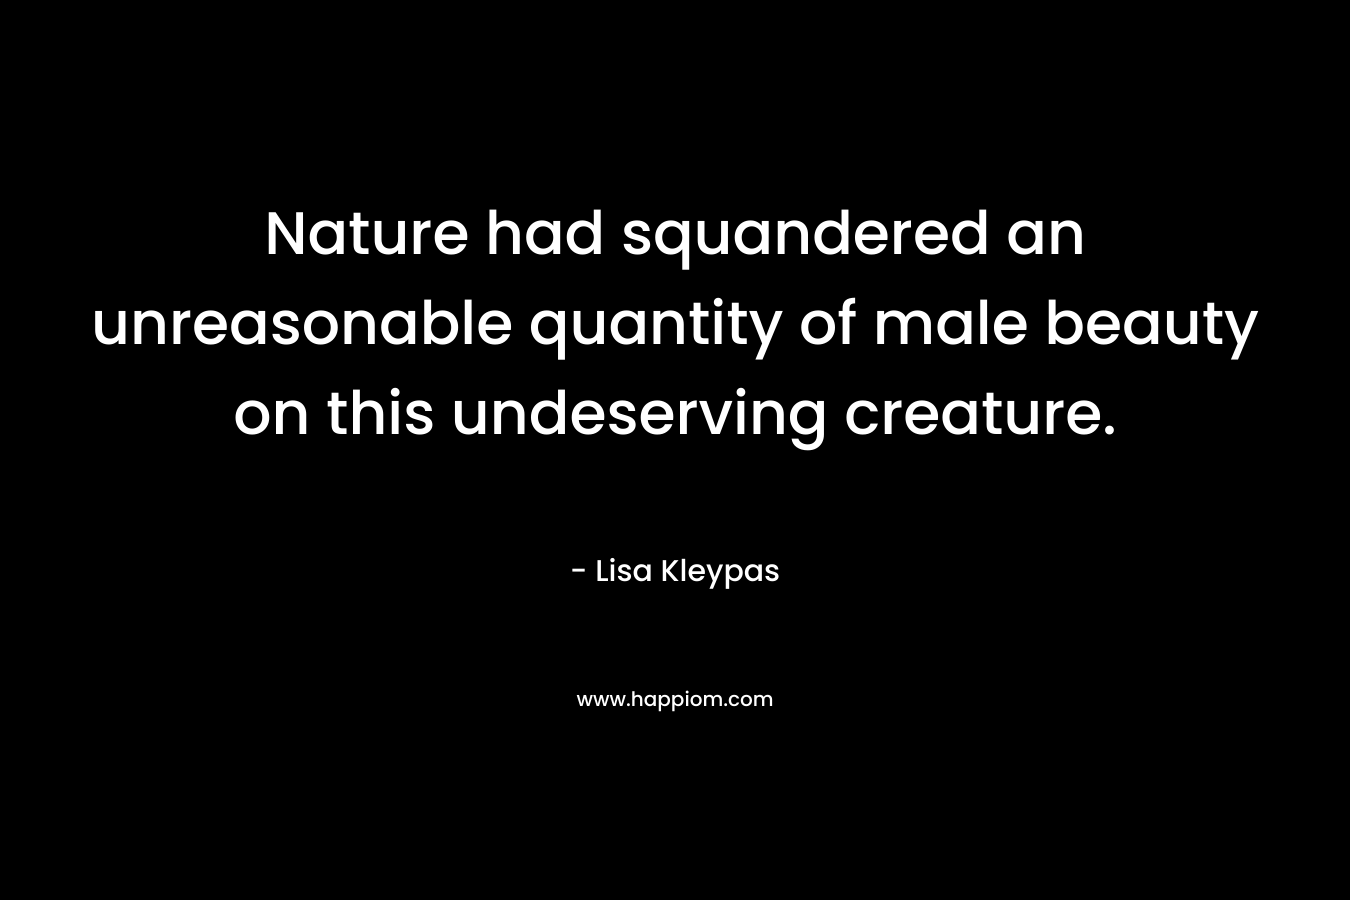 Nature had squandered an unreasonable quantity of male beauty on this undeserving creature. – Lisa Kleypas